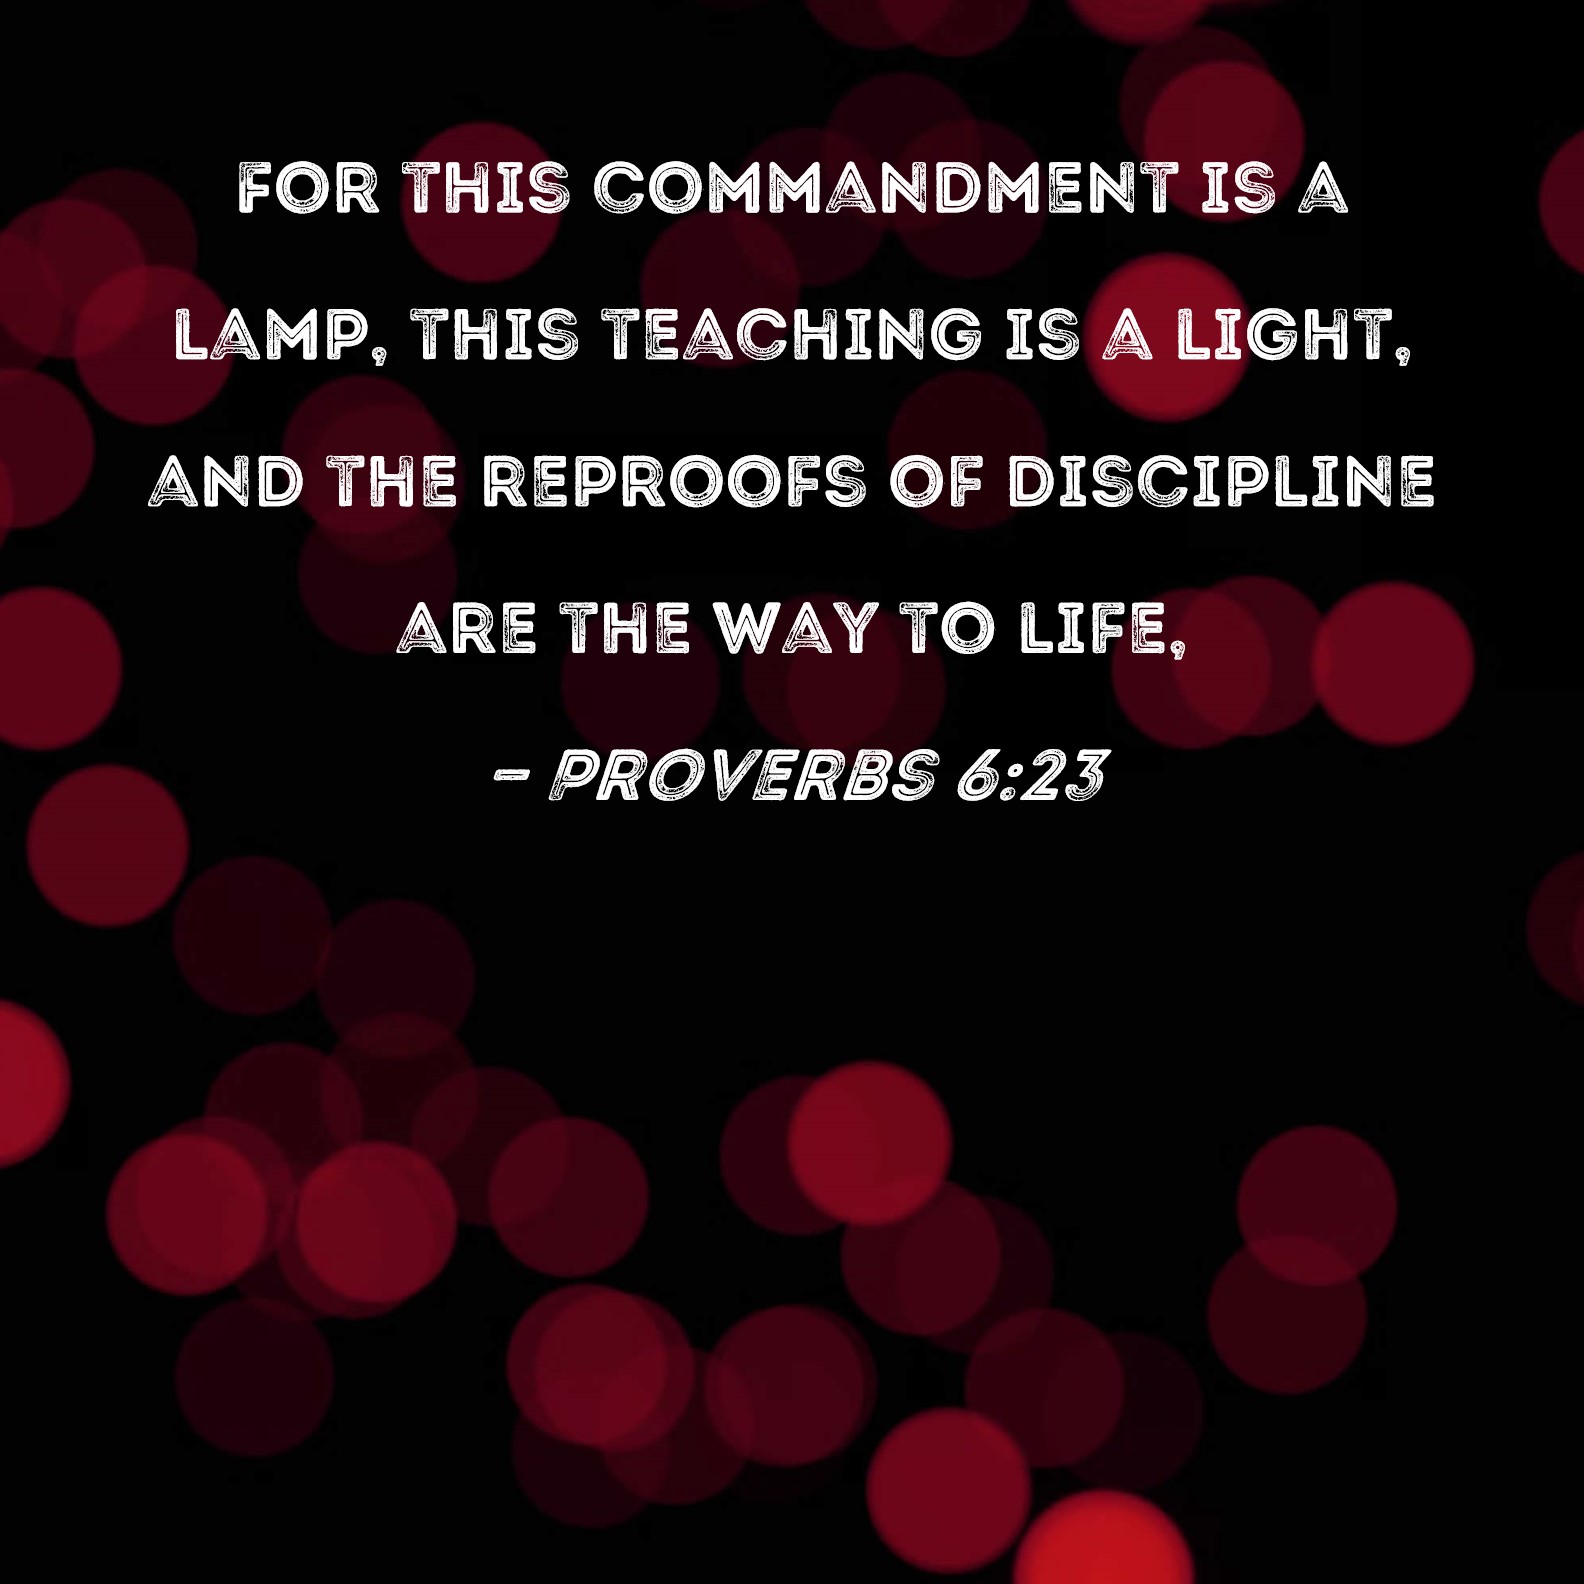 Proverbs 6:23 For this commandment is a lamp, this teaching a light, and reproofs of discipline are the way to life,